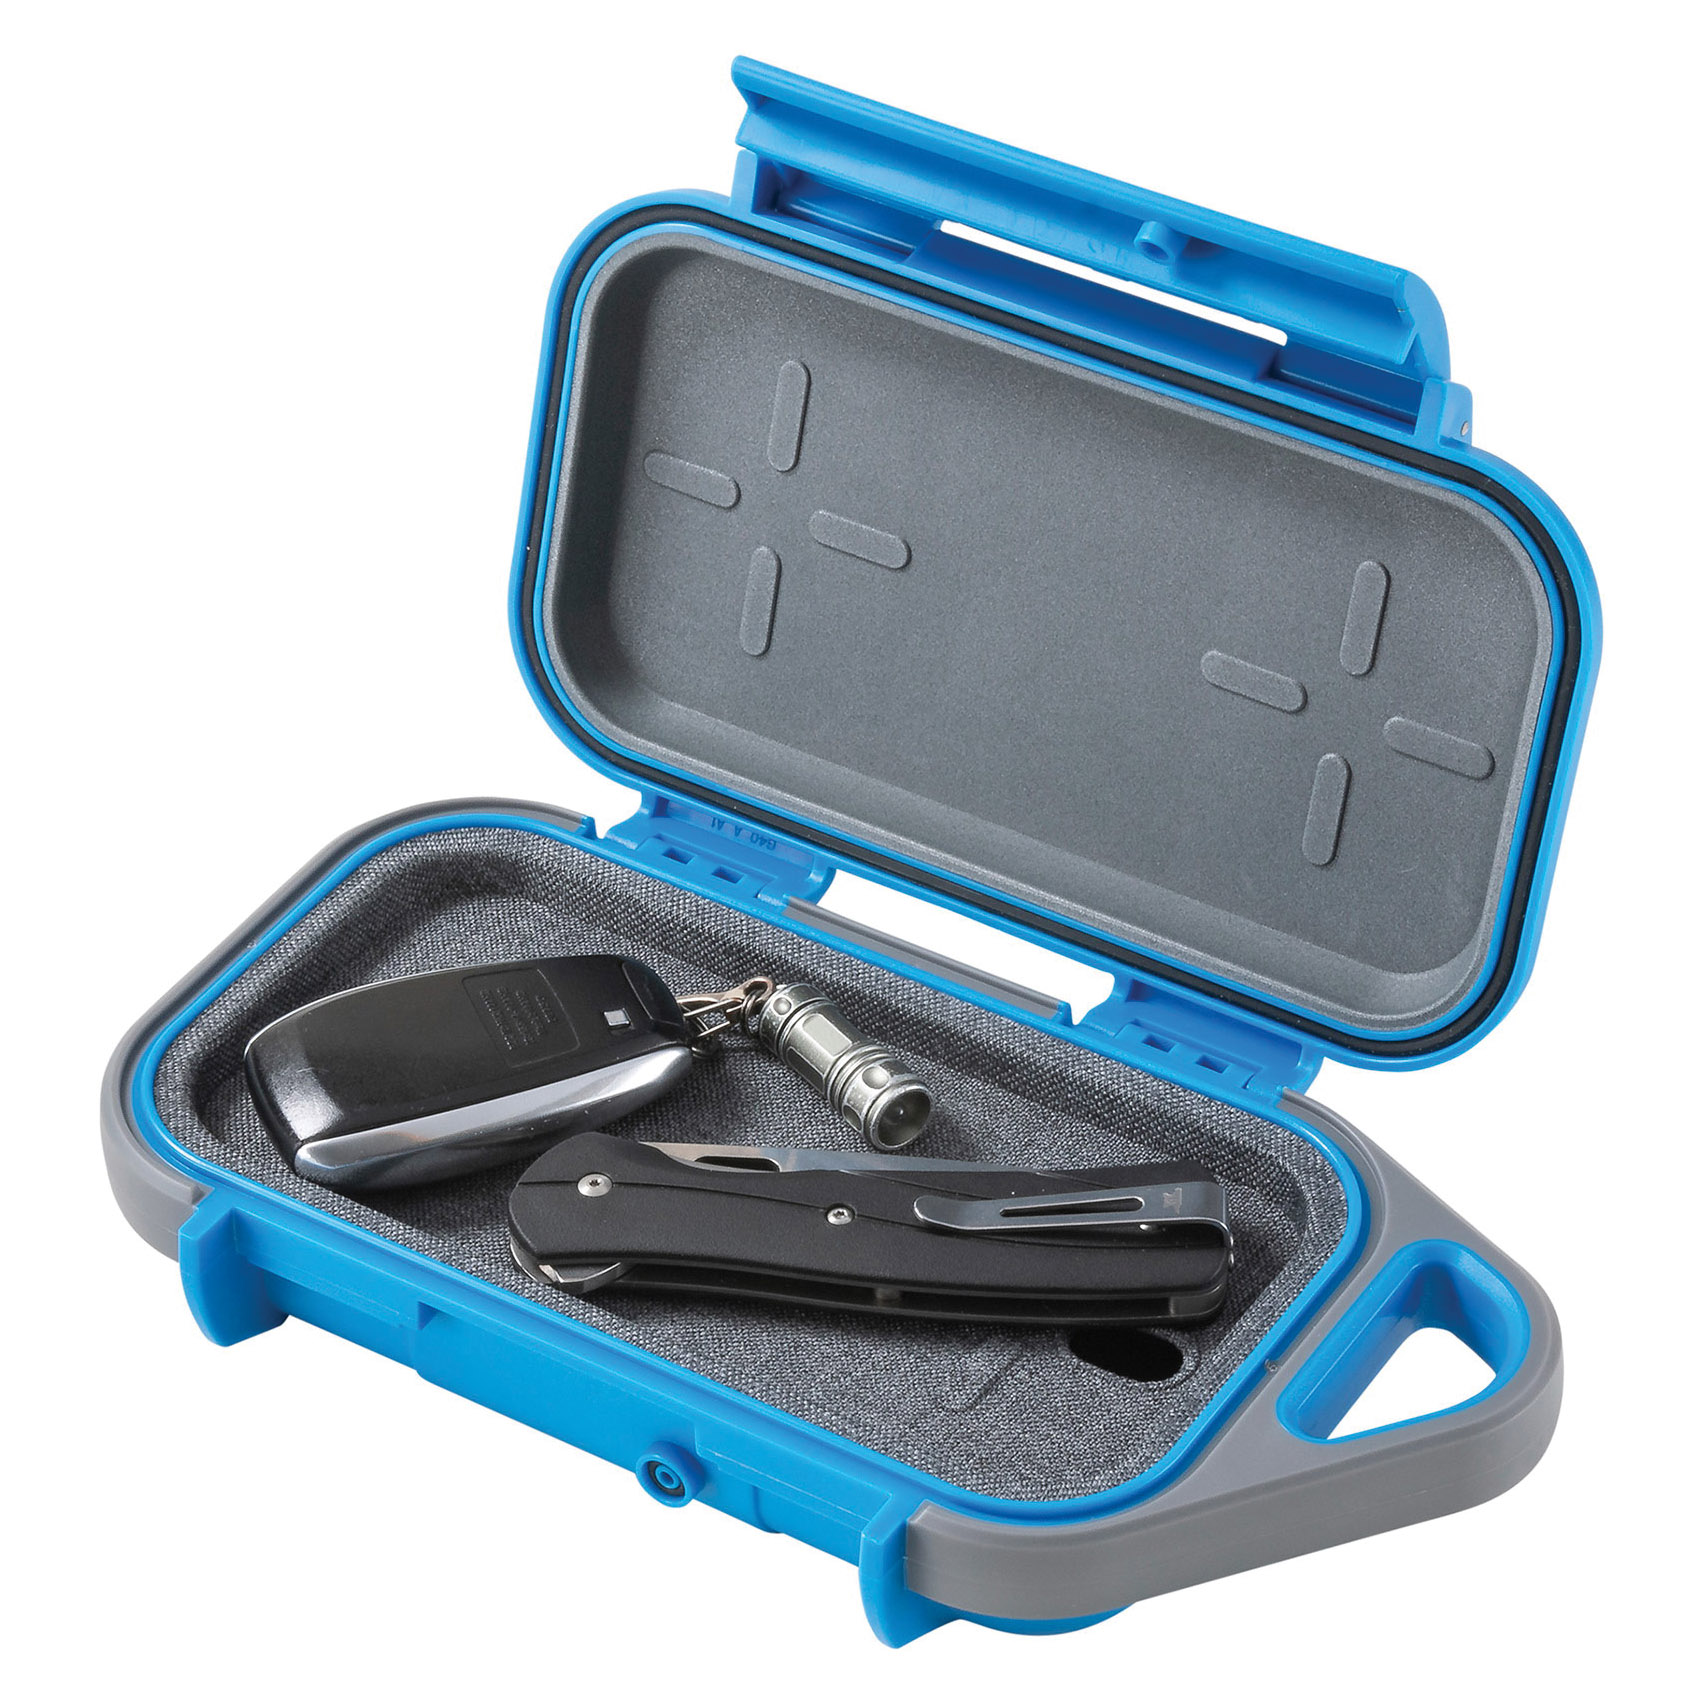 Pelican G40 Series GOG400-BLUE Personal Utility Case, ABS, Gray/Surf Blue, For: iPhone Xs Max, Samsung Note 9 - 4